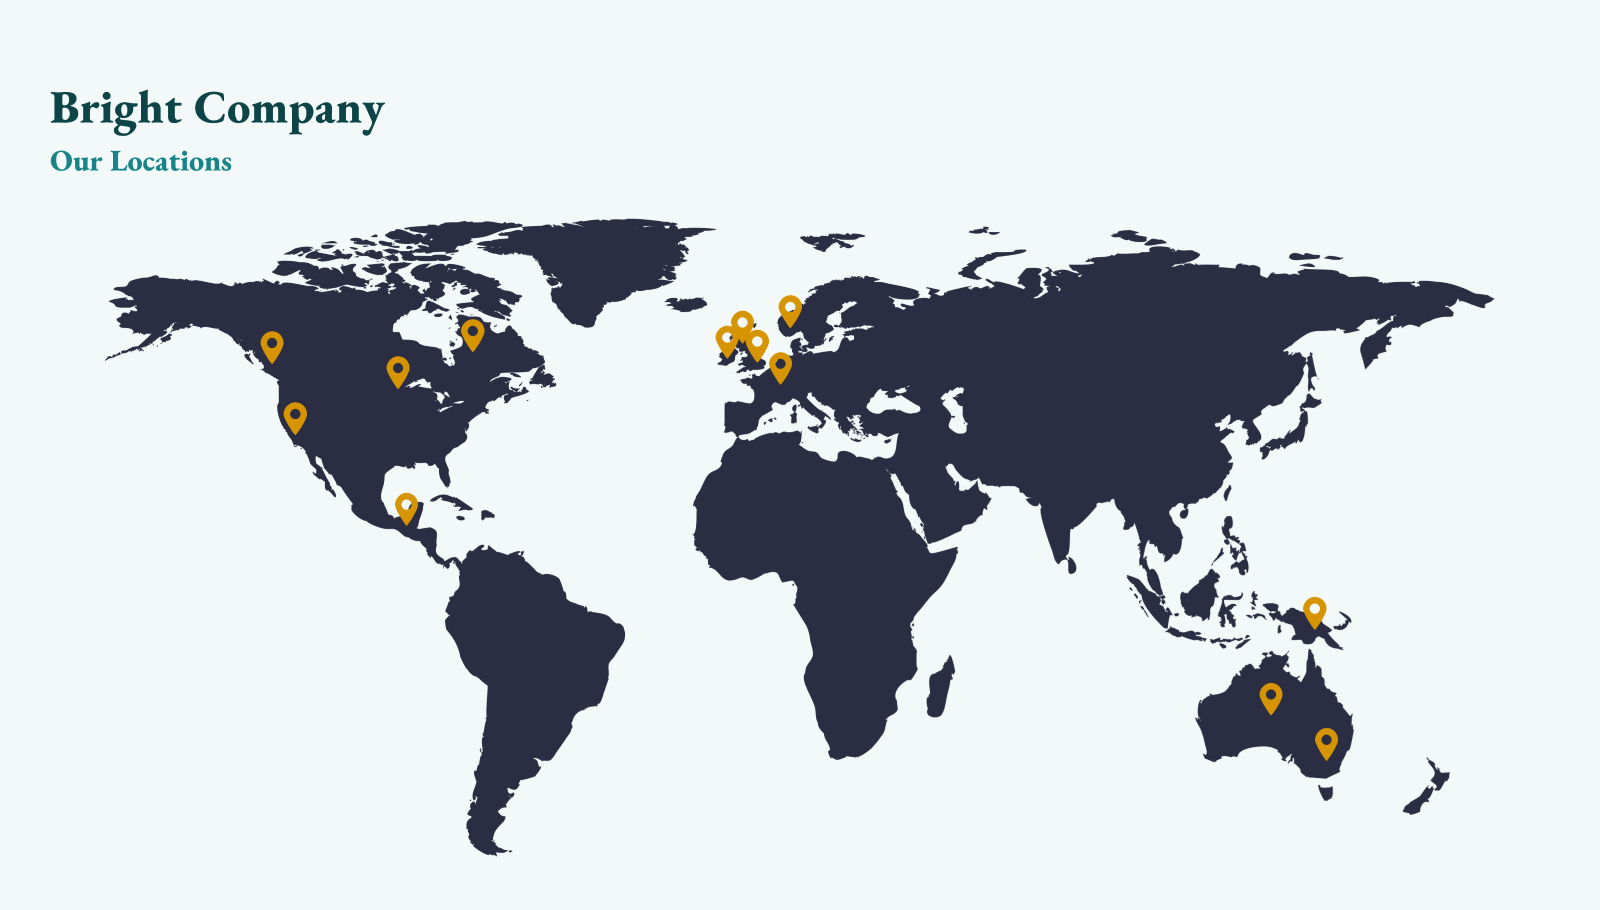 Screenshot of a PowerPoint slide with a map filling the space. Title: Bright Company Our Locations.